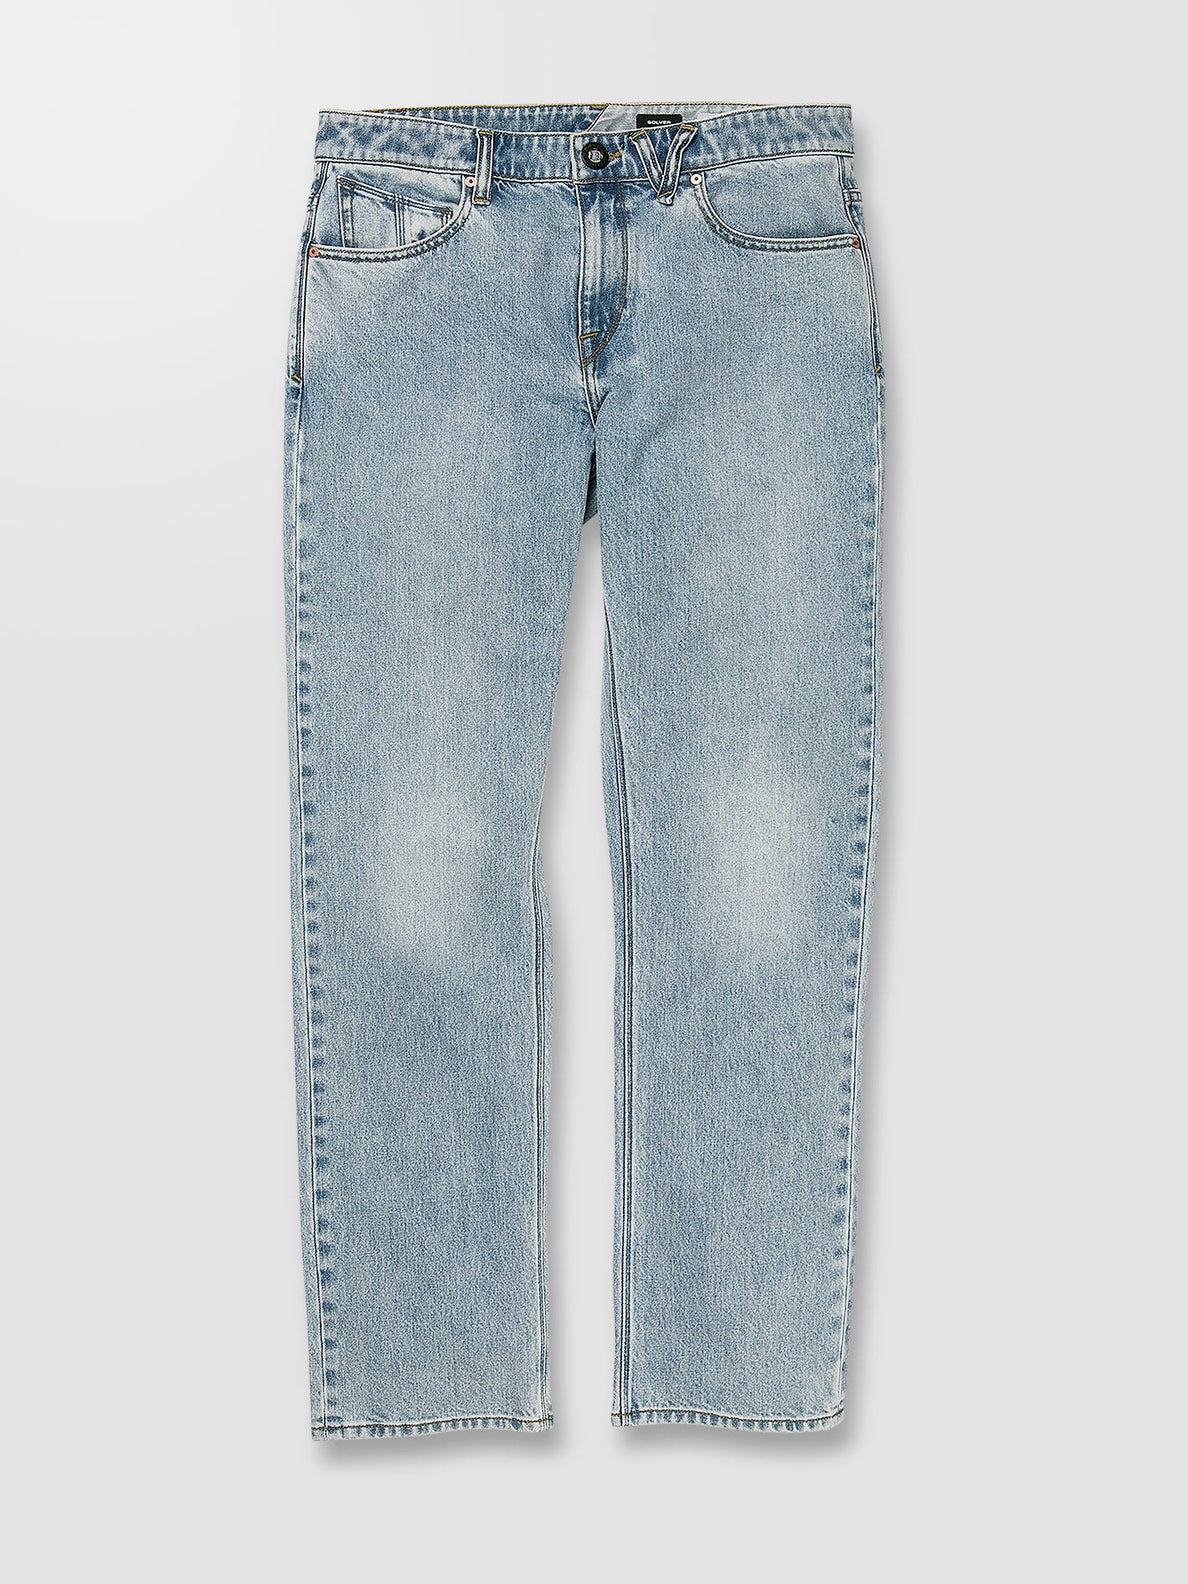 Solver Jeans - HEAVY WORN FADED (A1932204_HWR) [9]